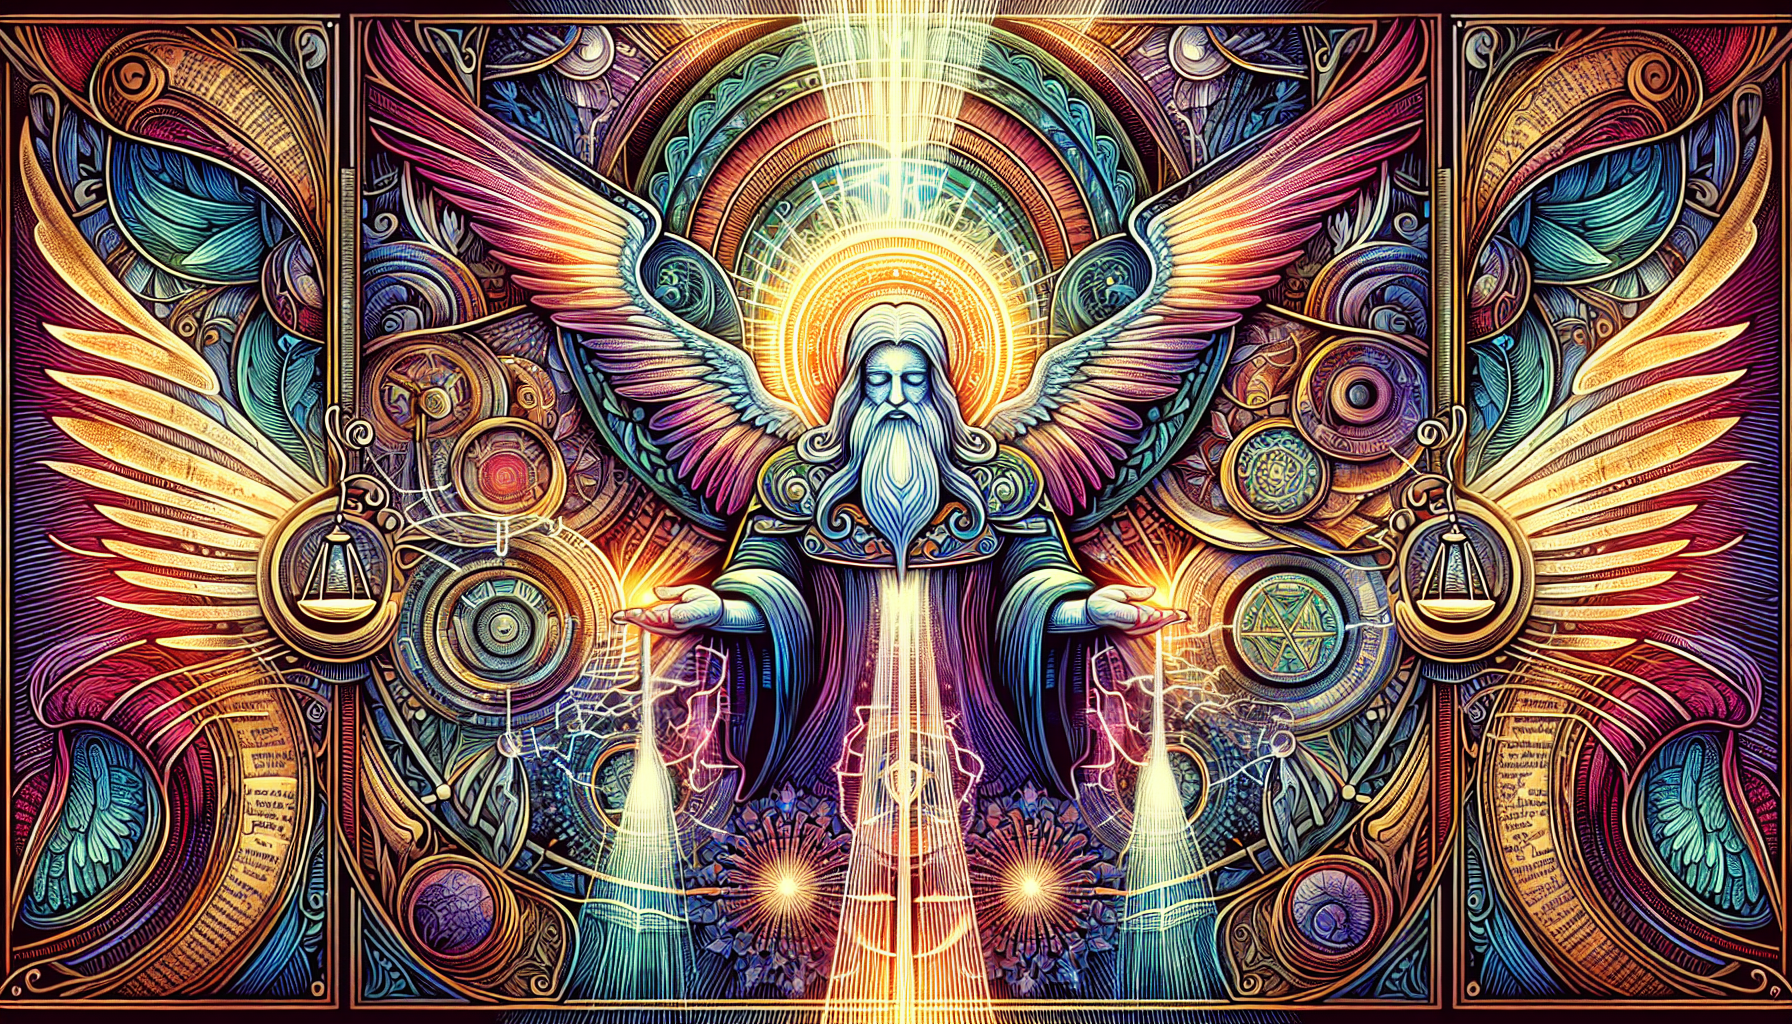 An intricate, glowing illustration of a wise, ethereal figure symbolizing the Just Judge, surrounded by ancient religious texts and divine light beams. The scene is set in a serene, sacred environment